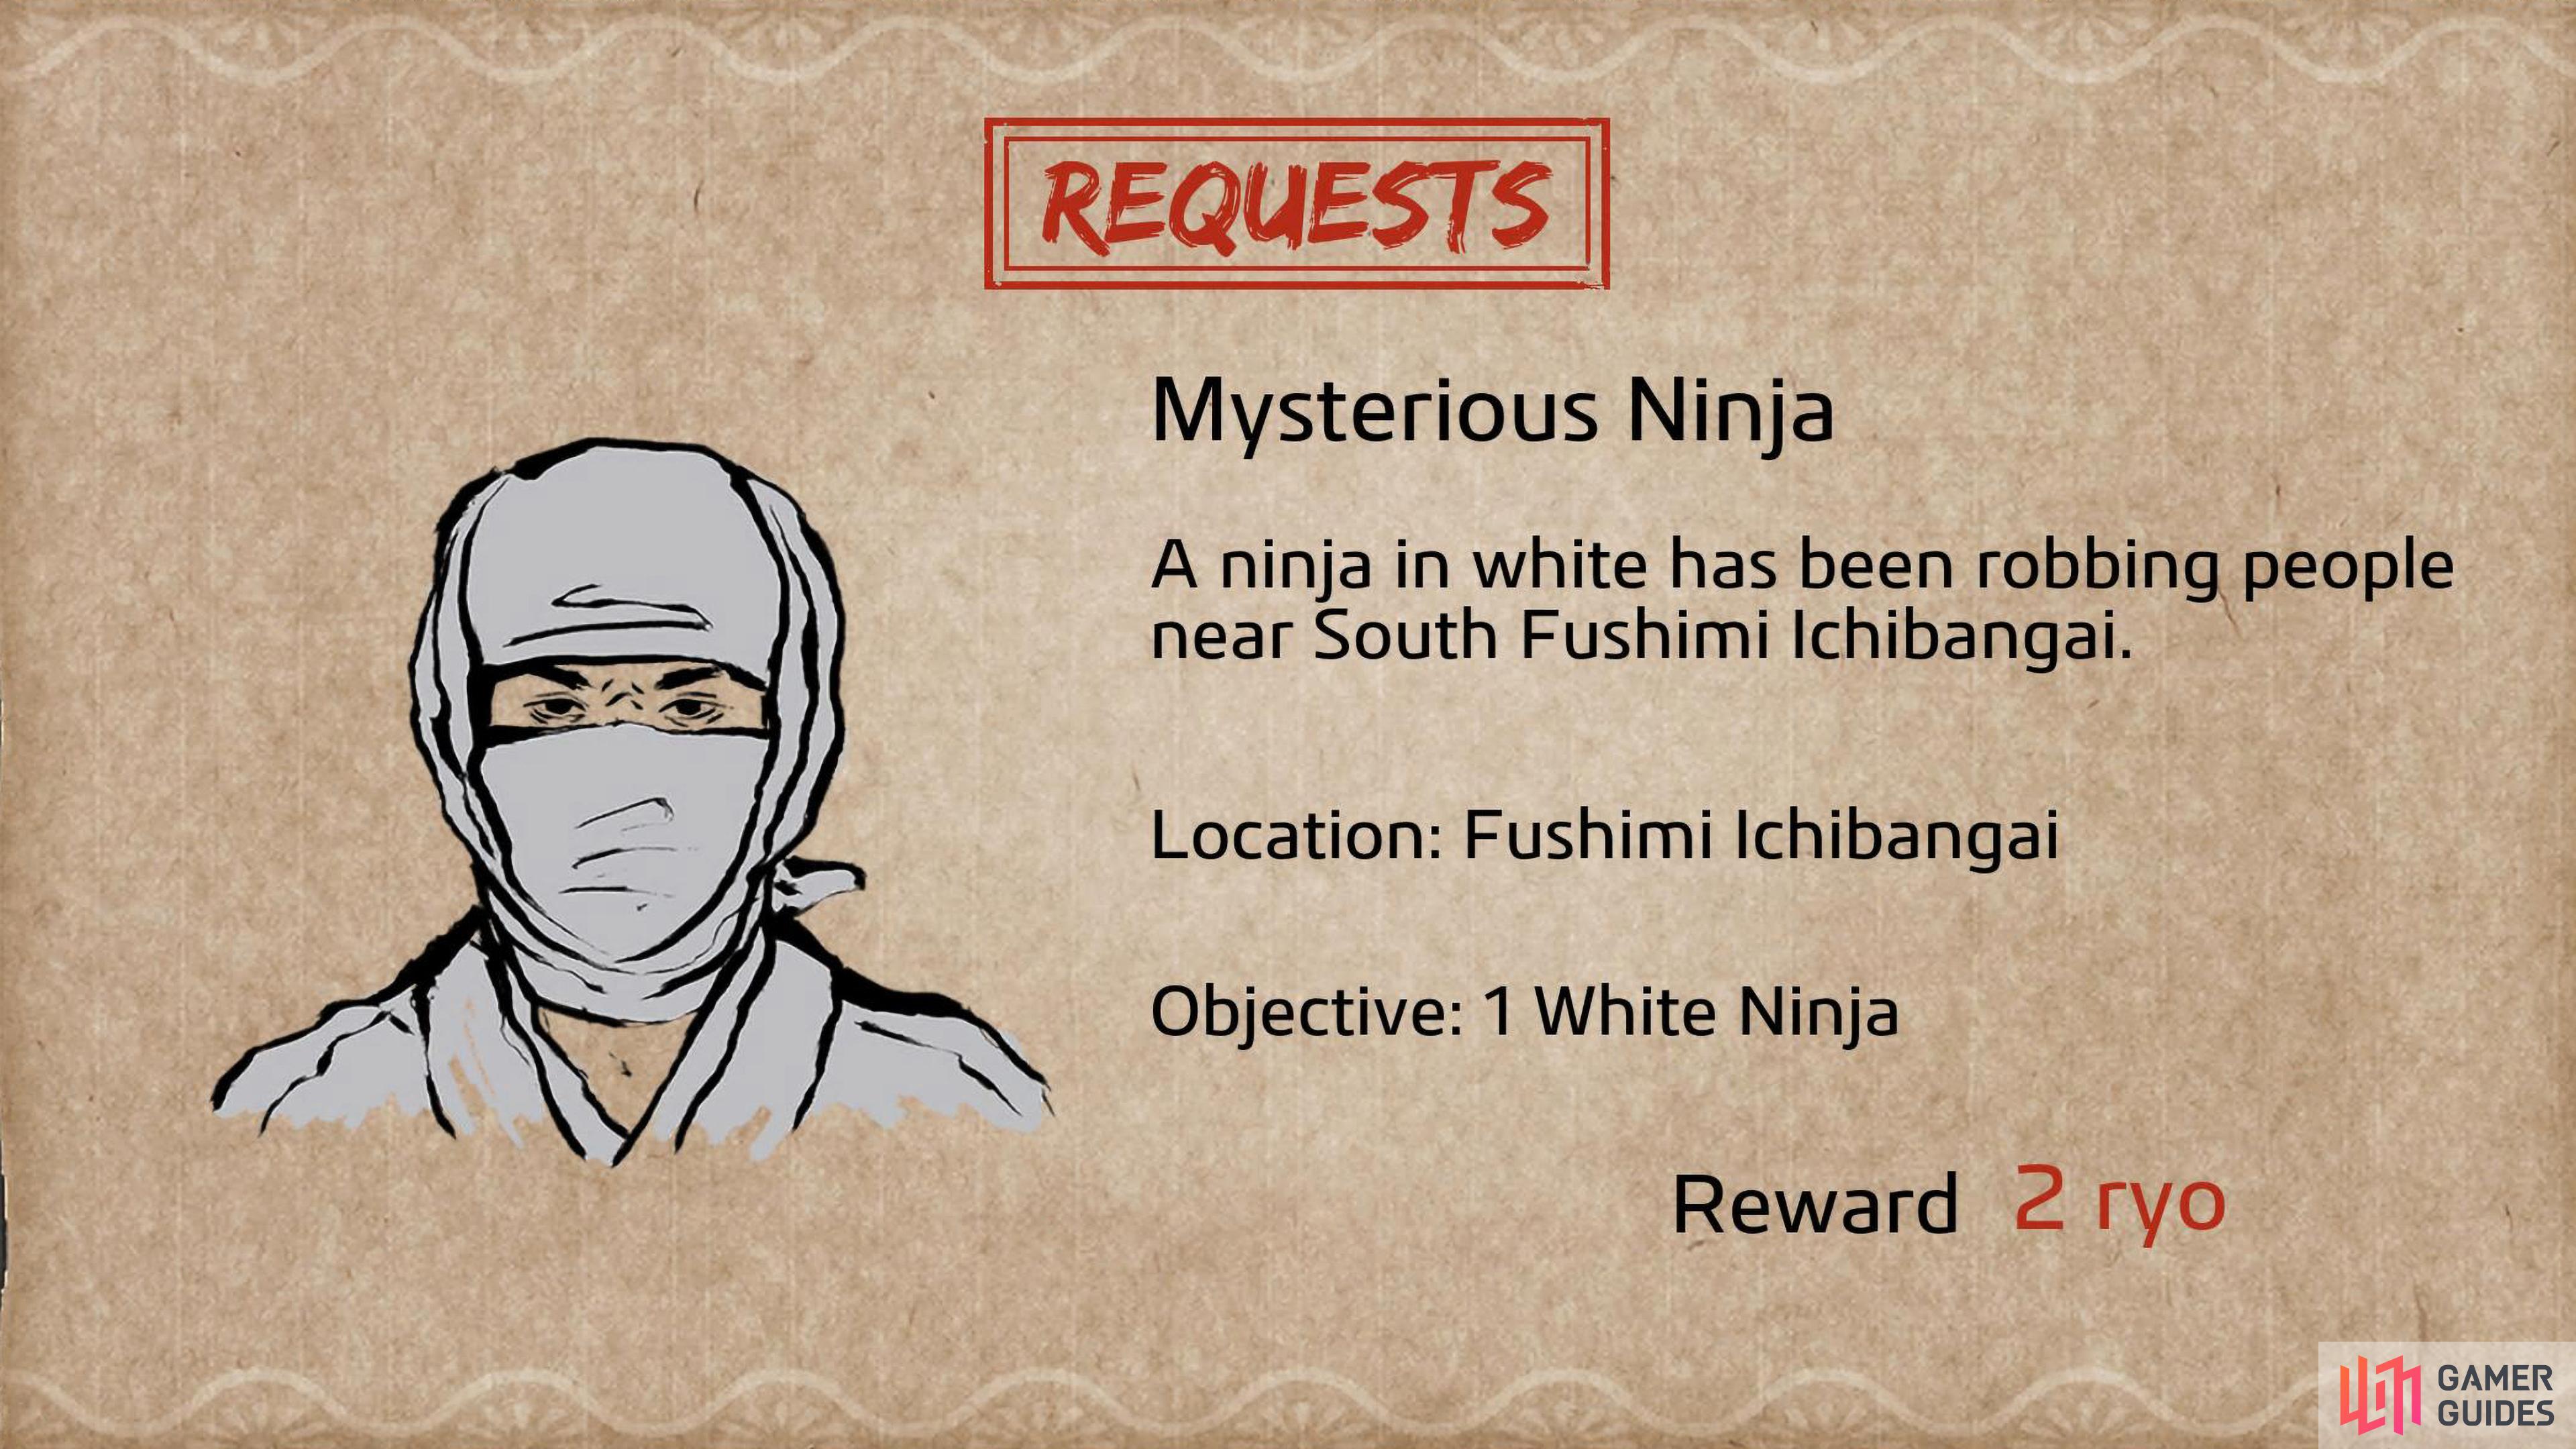 The Mysterious Ninja will be your third Wanted Men Request.